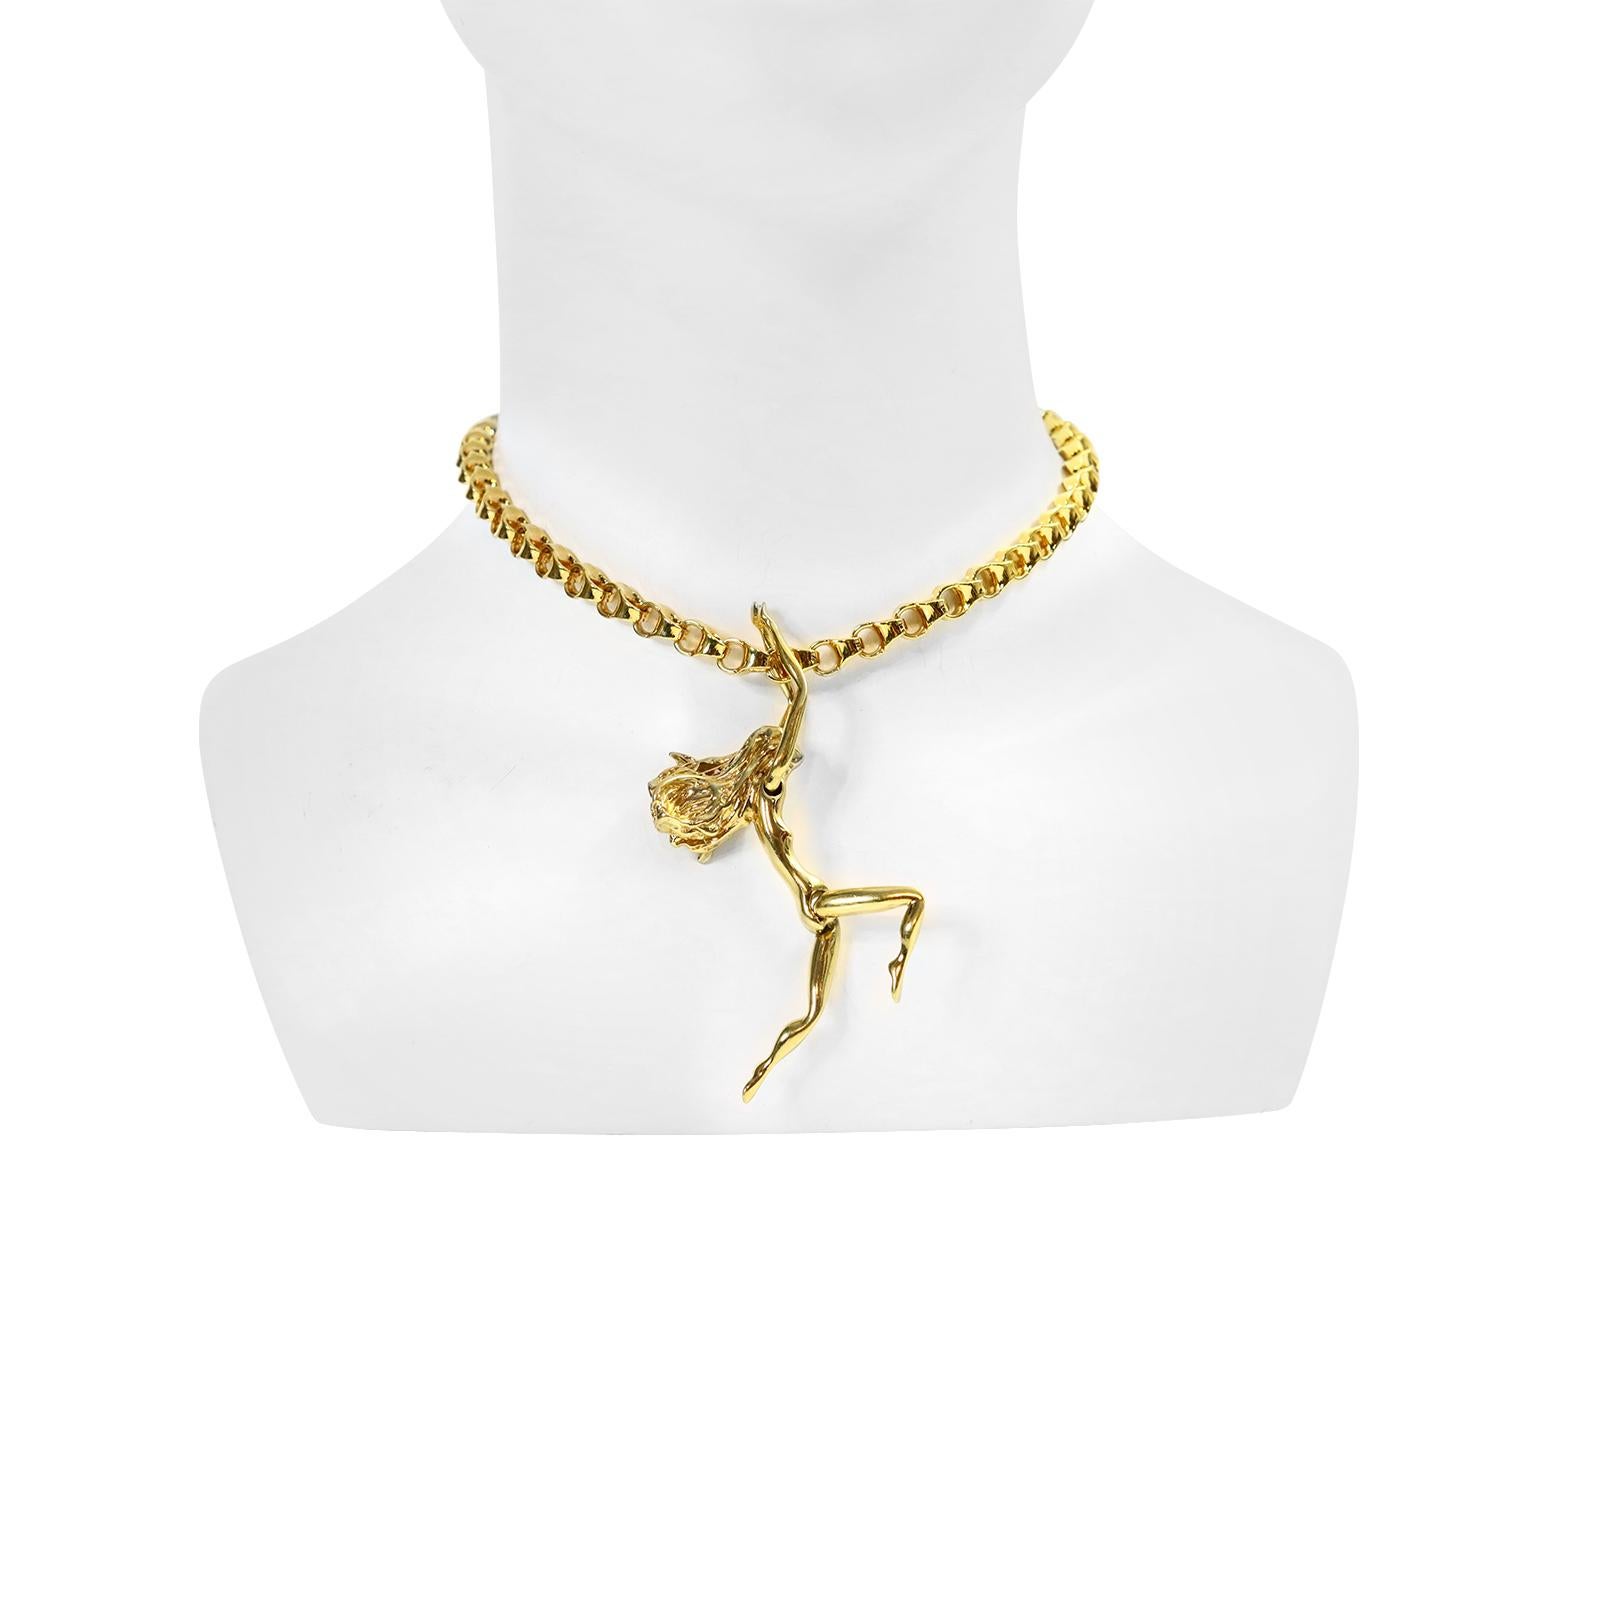 Vintage Julian Snelling Acrobatic Lady Necklace, Circa 1980s In Good Condition For Sale In New York, NY